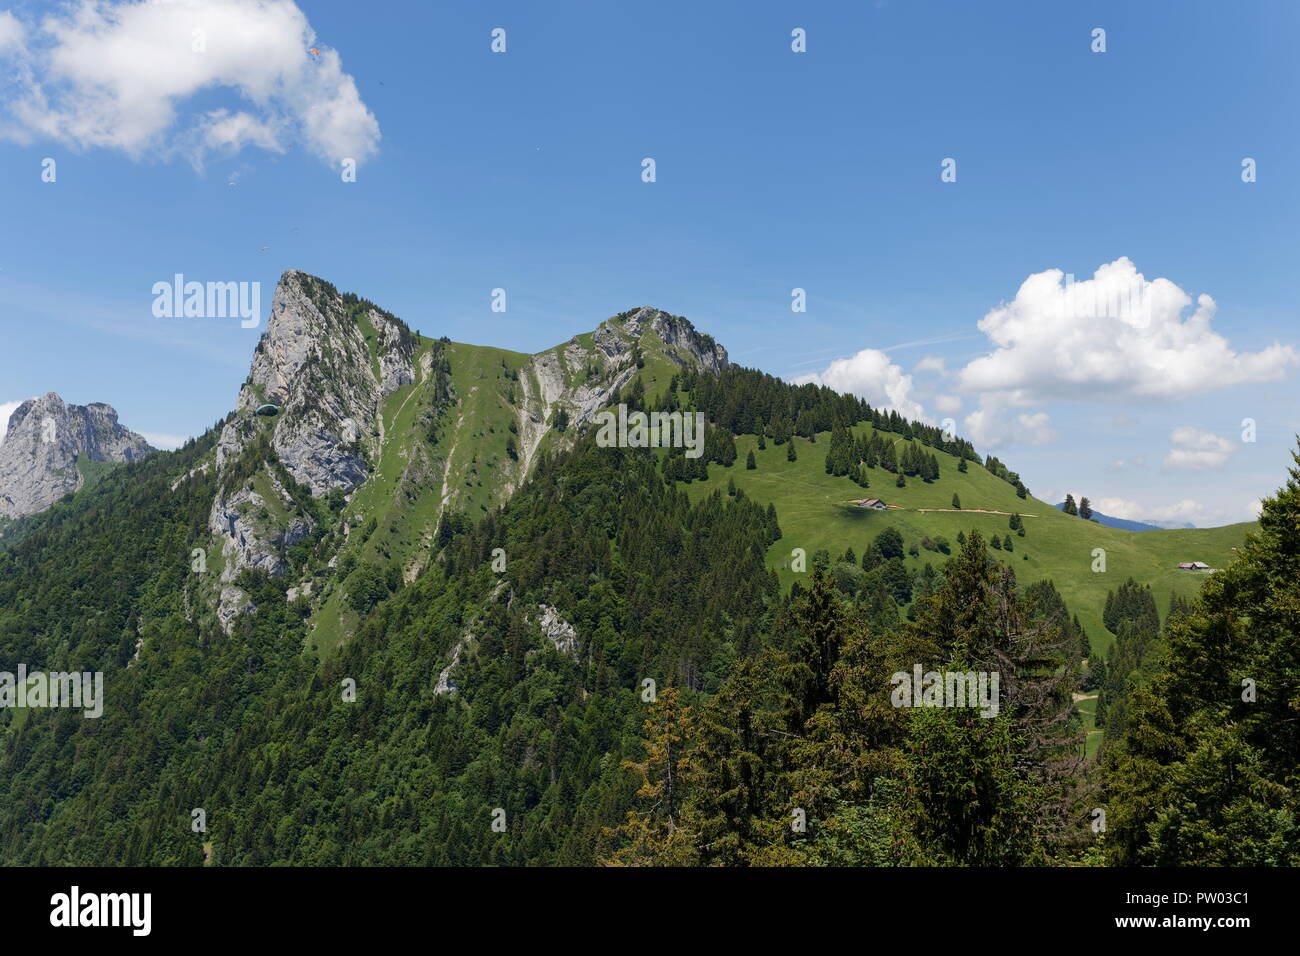 View from a walking trail showing mountains around Lake Annecy nr Montin France Stock Photo